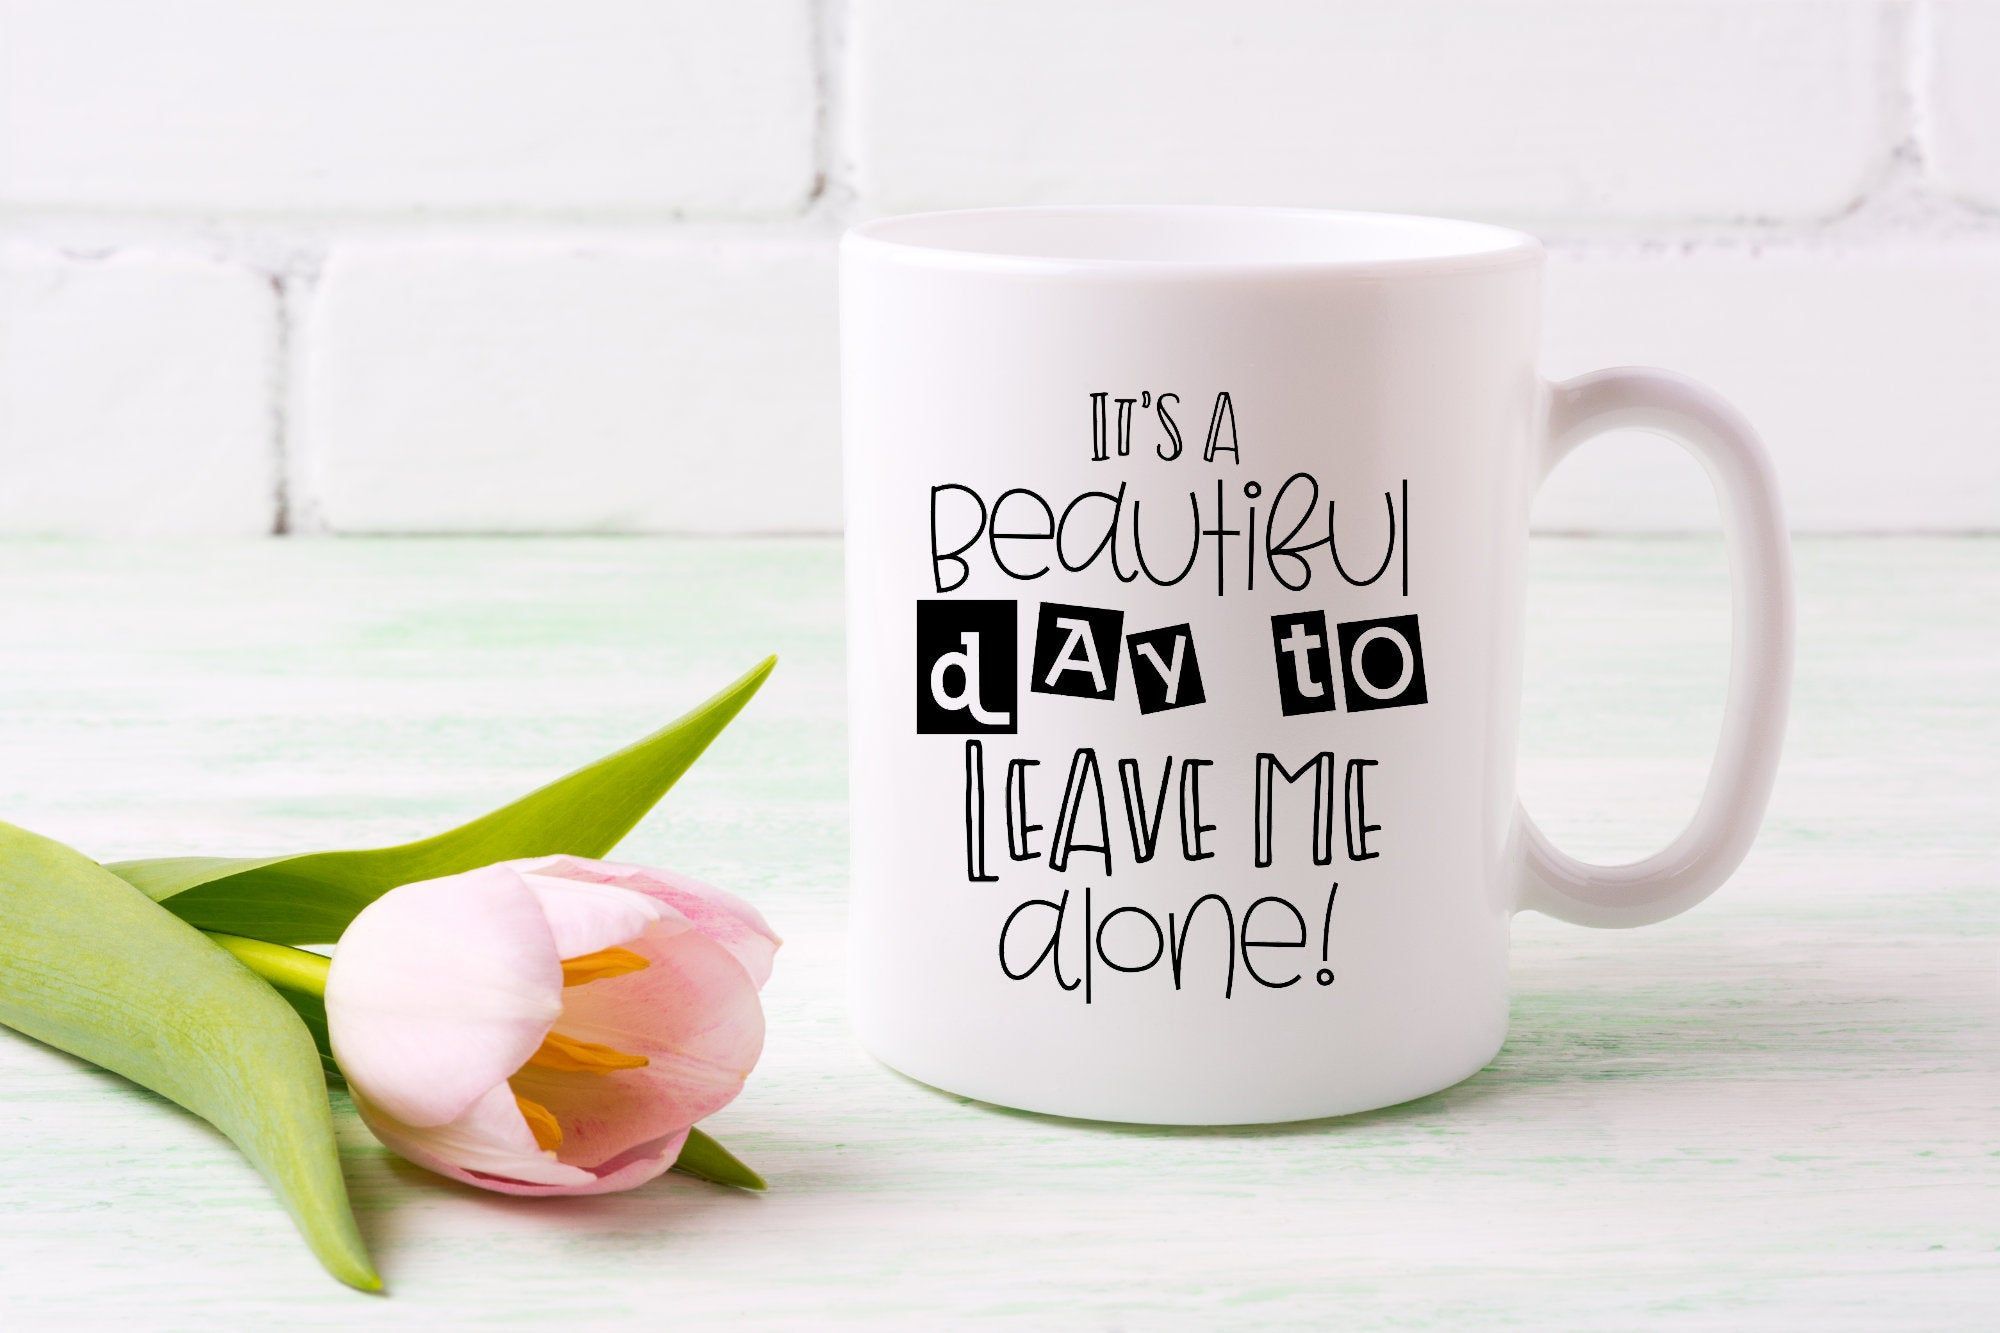 It's A Beautiful Day Leave Me Alone/Coffee Mugs/Sarcasm/Quotes/Inspirational/Day Drinking/Beautiful Soul/Dye Sublimation Ink/Handled mug - It's A Beautiful Day Leave Me Alone/Coffee Mugs/Sarcasm/Quotes/Inspirational/Day Drinking/Beautiful Soul/Dye Sublimation Ink/Handled mug -   18 beauty Day inspiration ideas